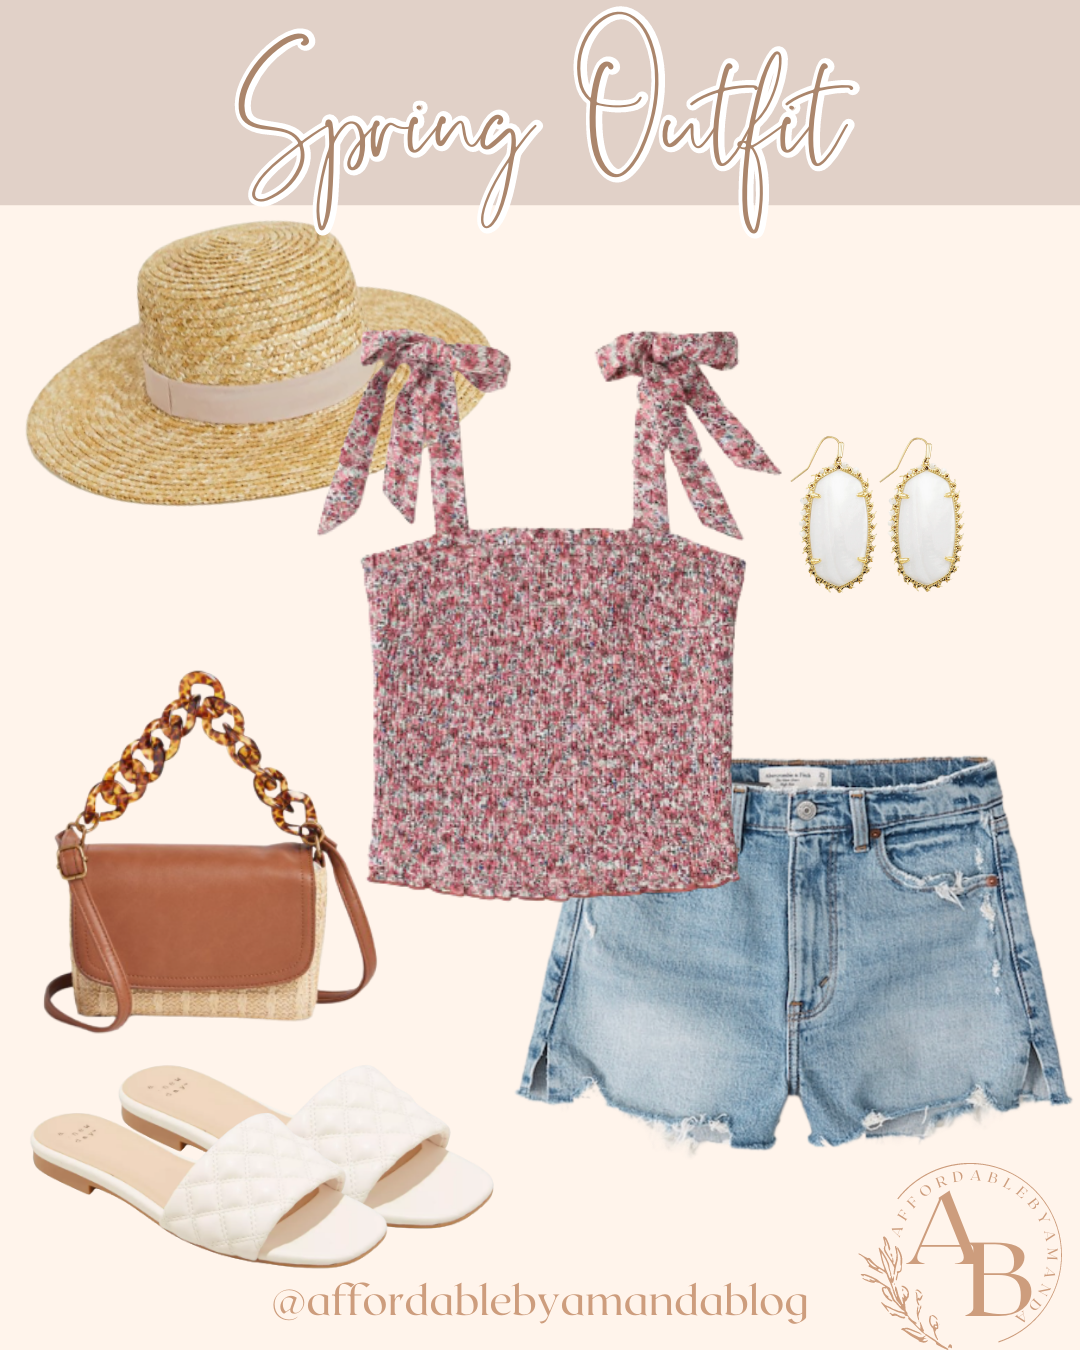 Spring Outfit Ideas For 2021 That Are Affordable & Trendy — Champagne &  Savings